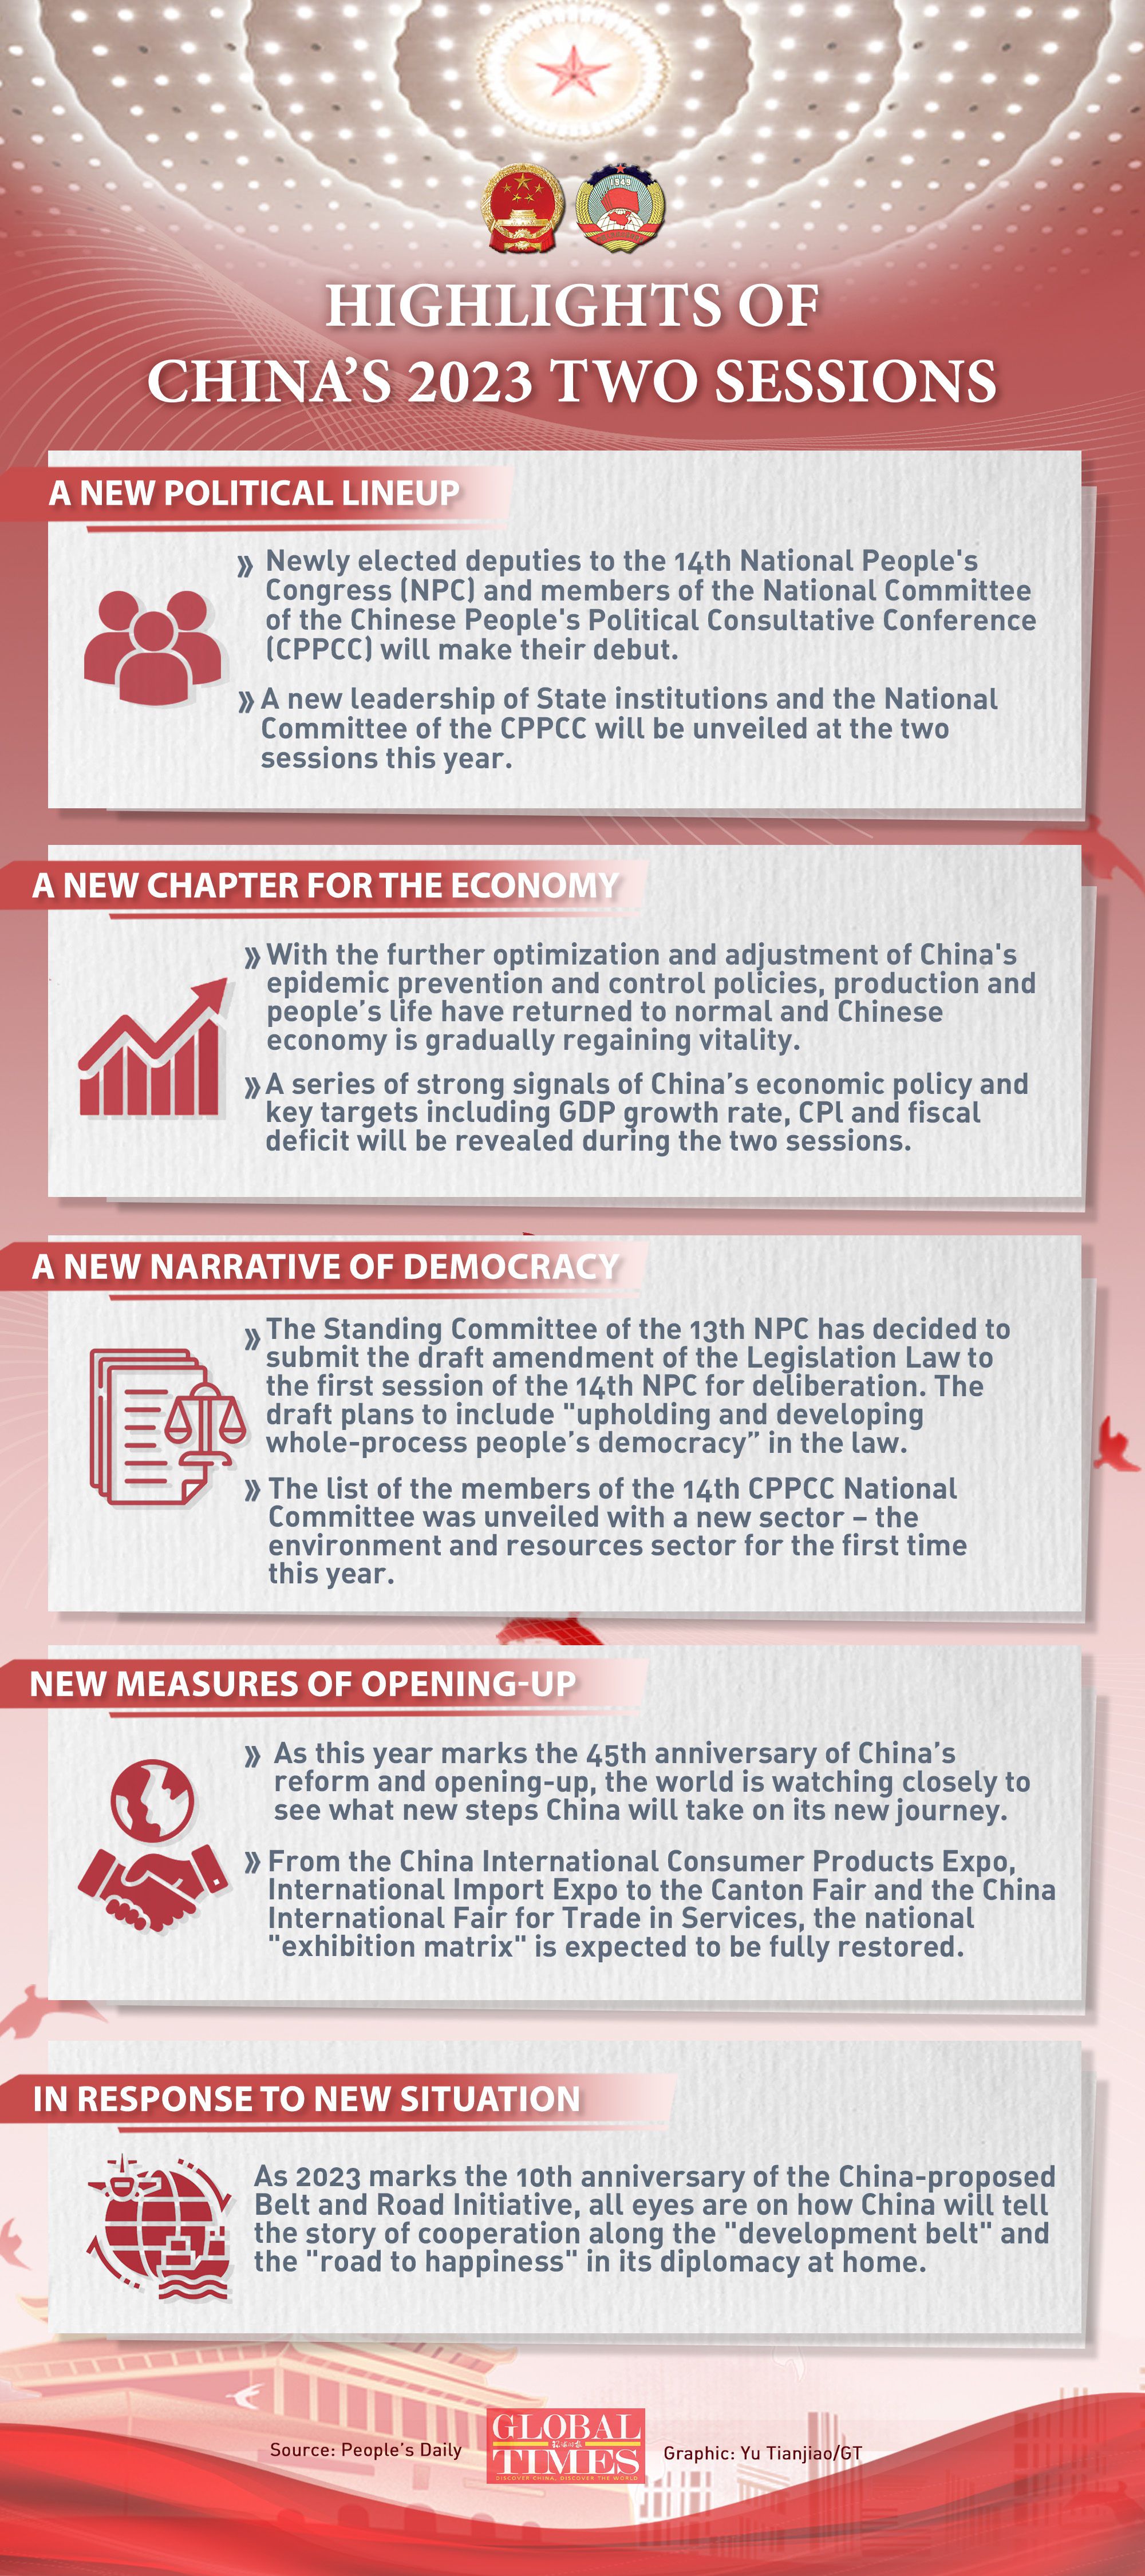 Newly elected deputies to the 14th NPC and members of the CPPCC National Committee will make their debut at this year's “#TwoSessions,” the biggest annual gatherings in China's political calendar, which will kick off this weekend. Here are the highlights of the event: